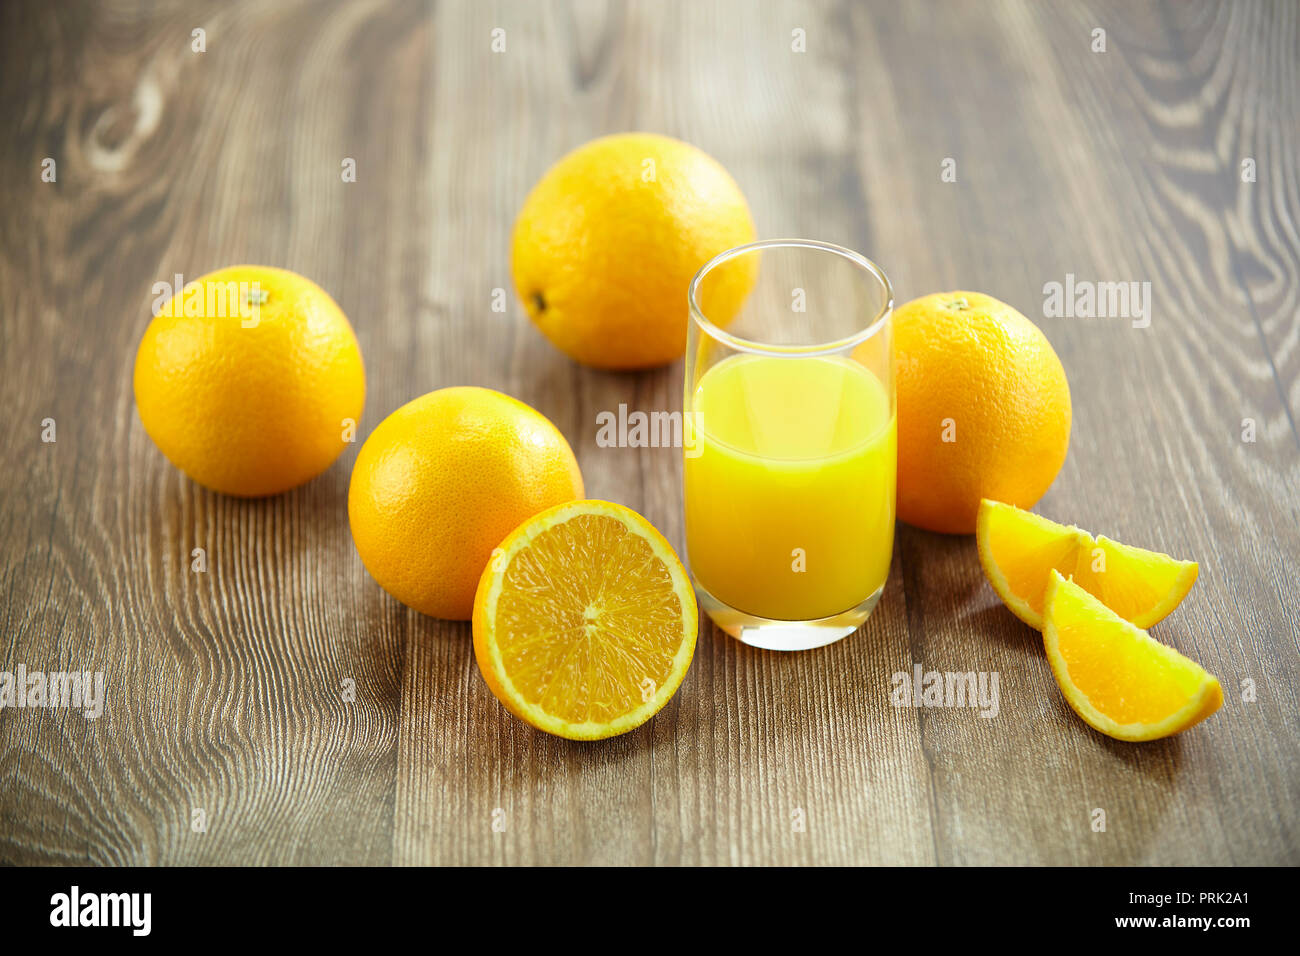 several oranges and a glass of orange juice on hard wood surface. Stock Photo